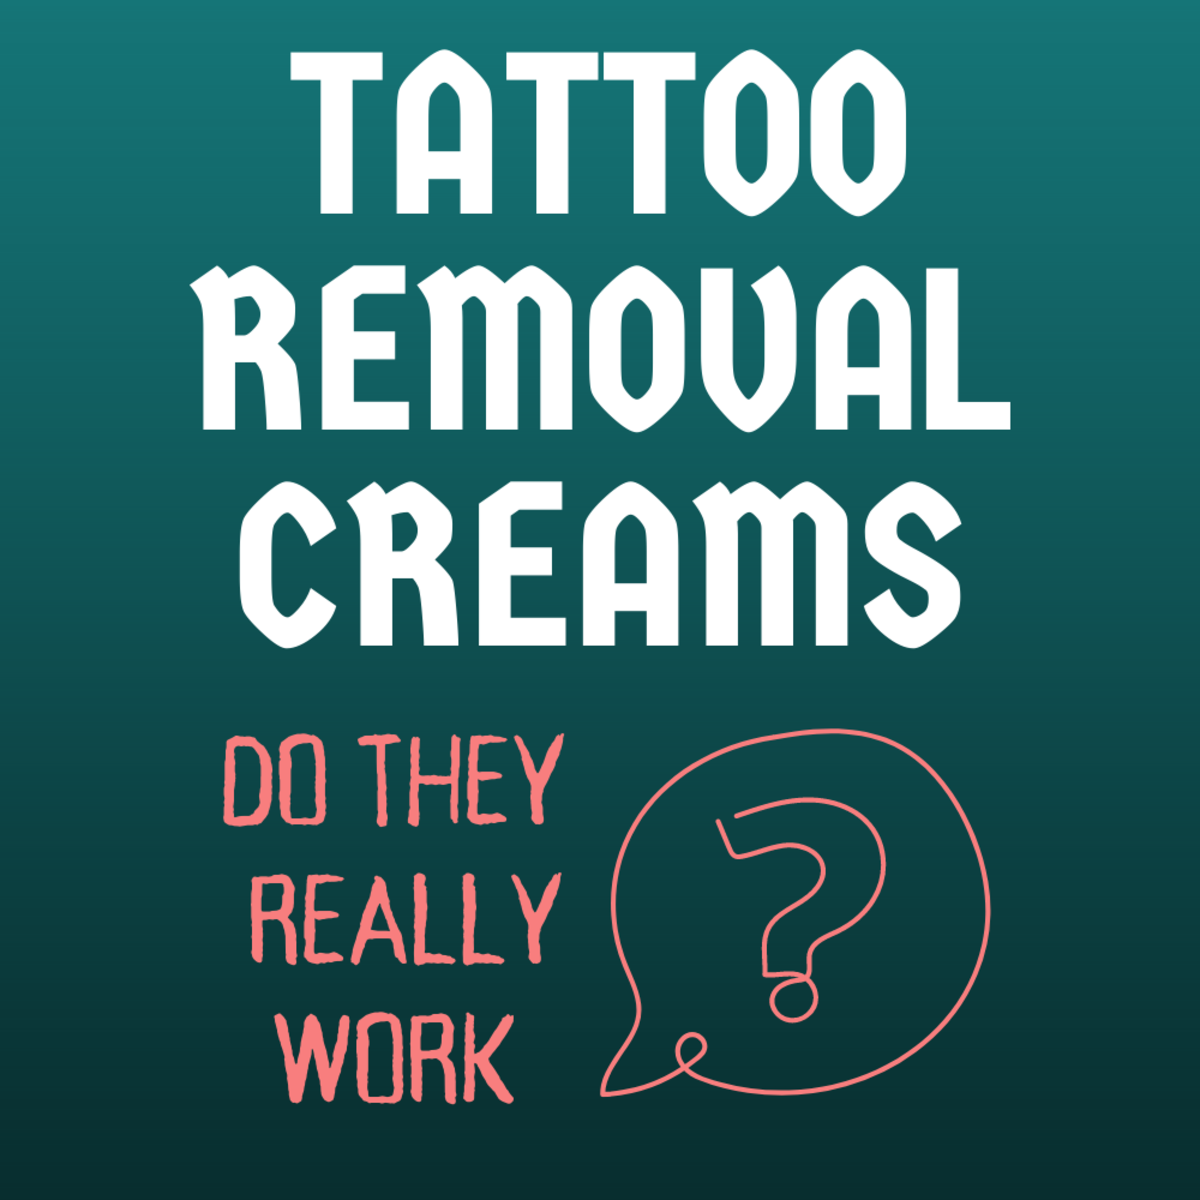 Tattoo Removal Creams: Do They Really Work?